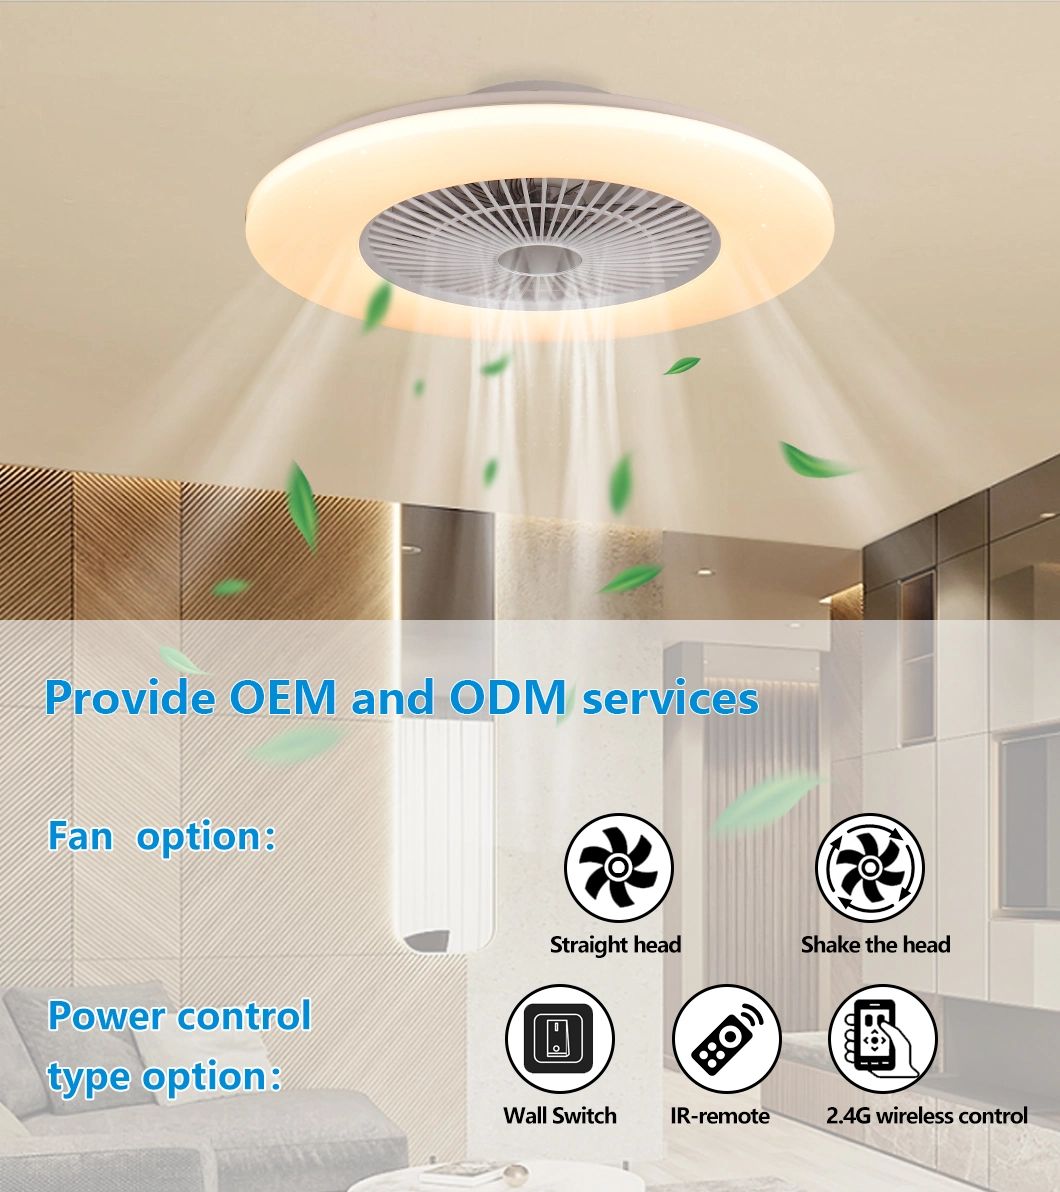 Bluetooth APP Control 6-Speed Control Modern Ceiling Fan with Dimmable Light